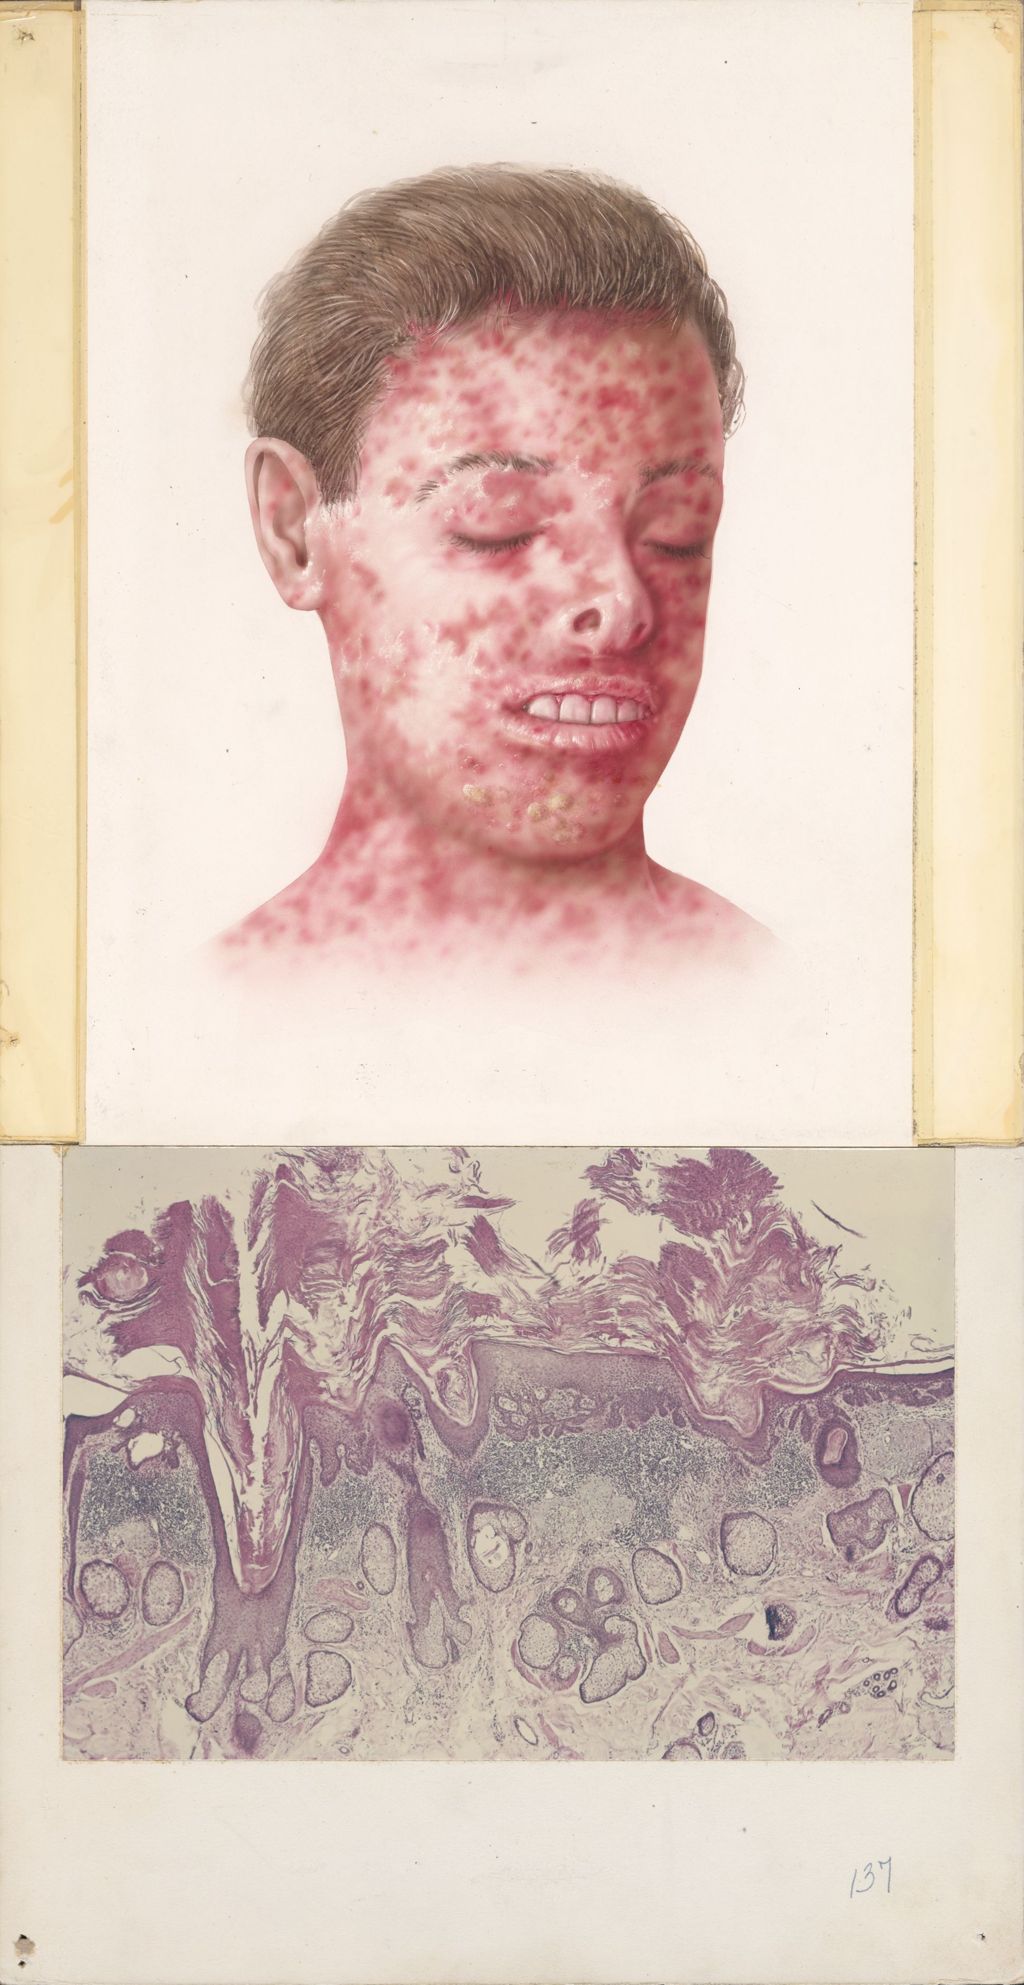 Miniature of Medical Profiles, skin changes due to the action of the ultraviolet light and to sensitivity to the sun's rays